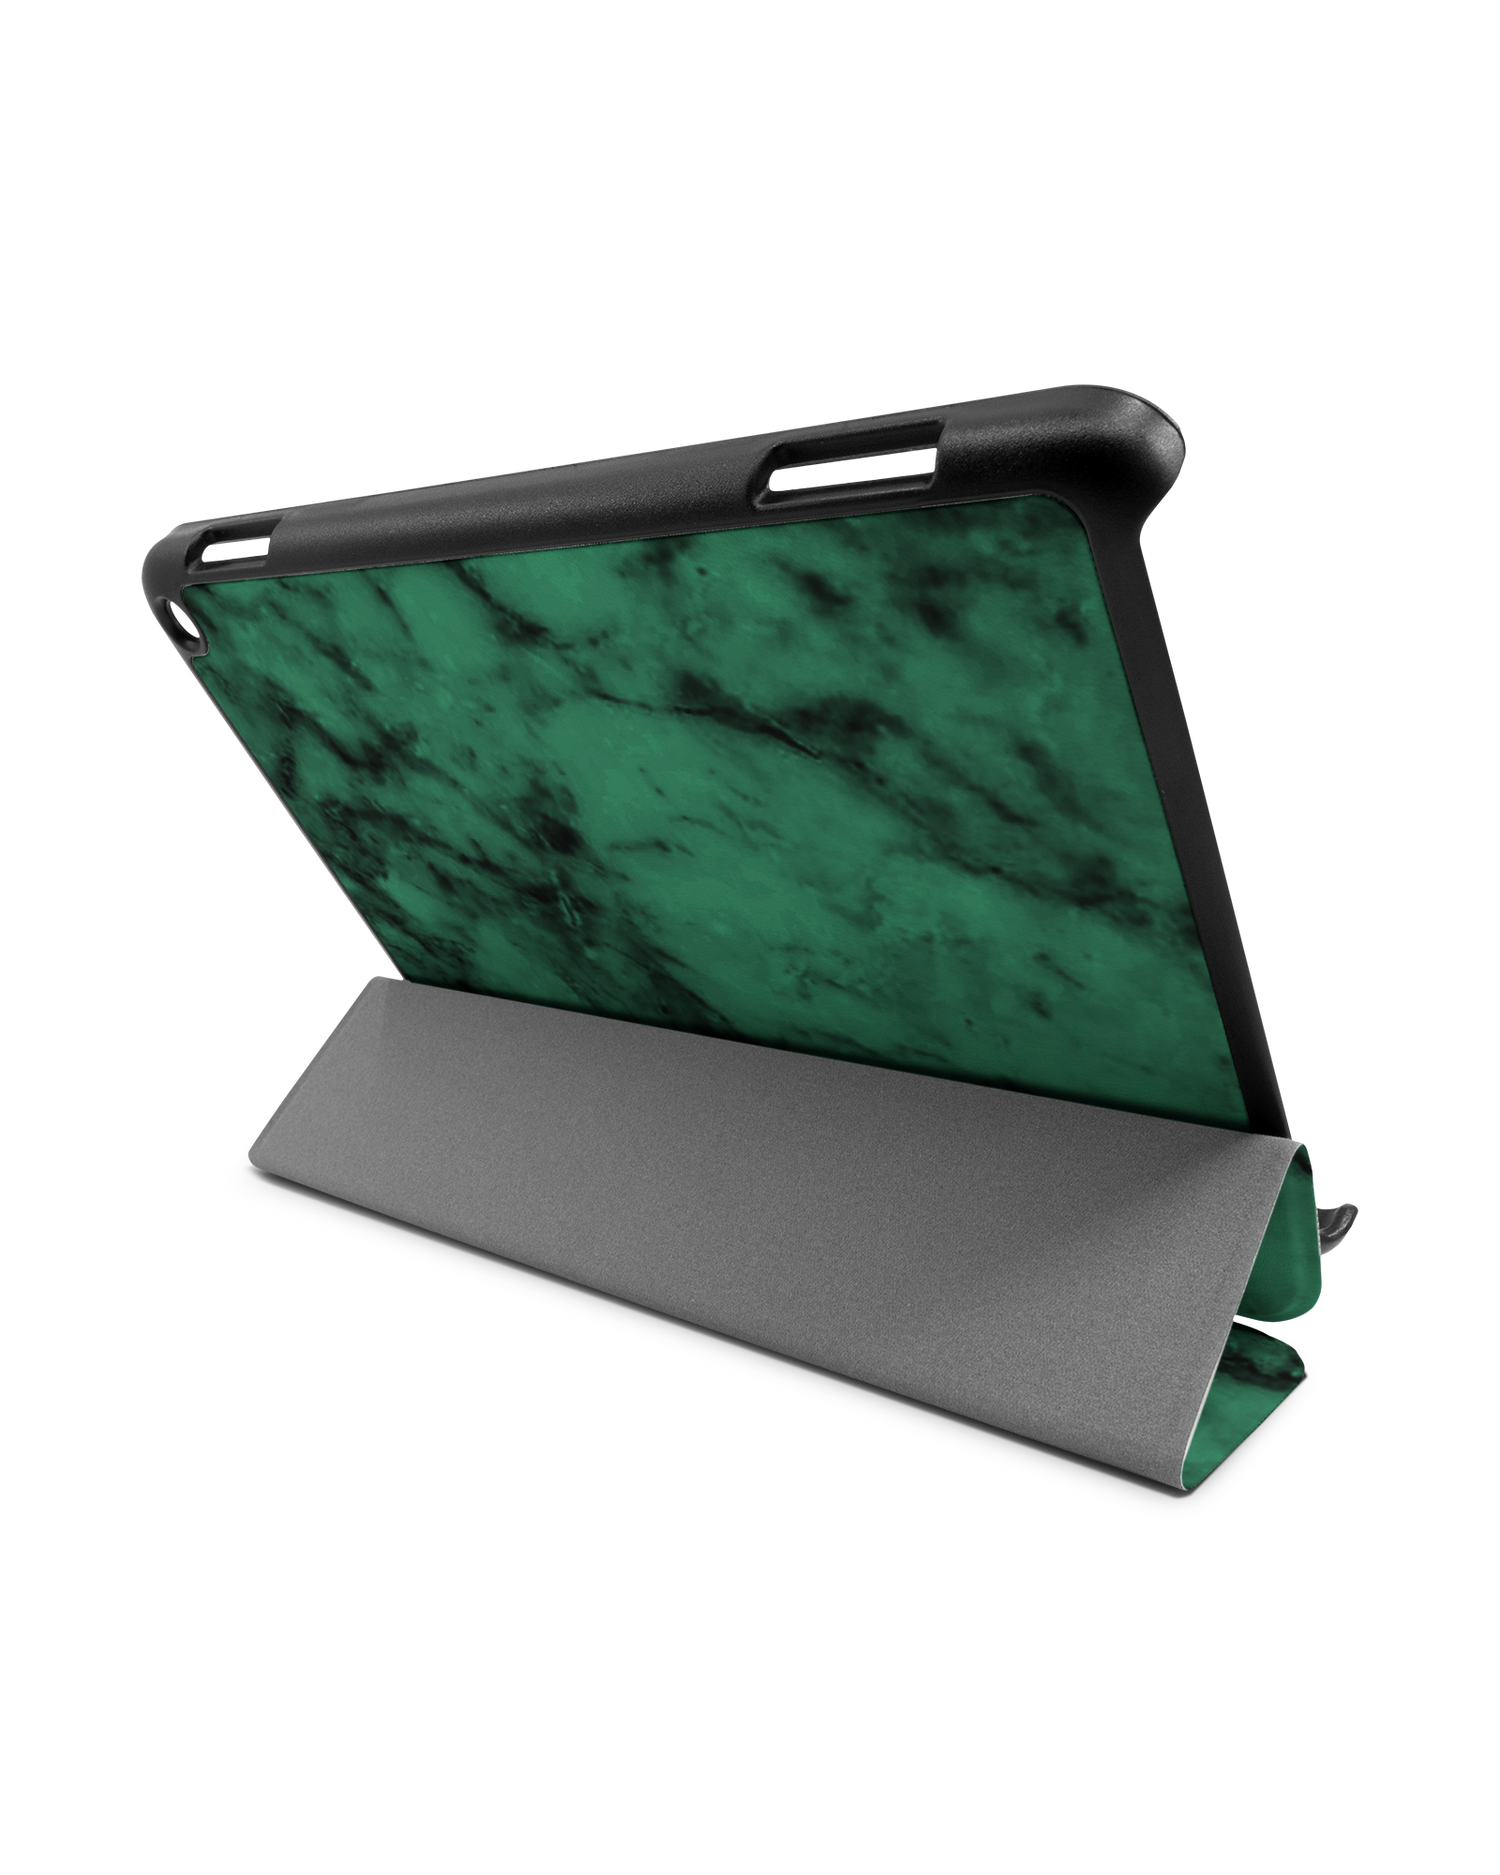 Green Marble Tablet Smart Case for Amazon Fire HD 8 (2022), Amazon Fire HD 8 Plus (2022), Amazon Fire HD 8 (2020), Amazon Fire HD 8 Plus (2020): Used as Stand